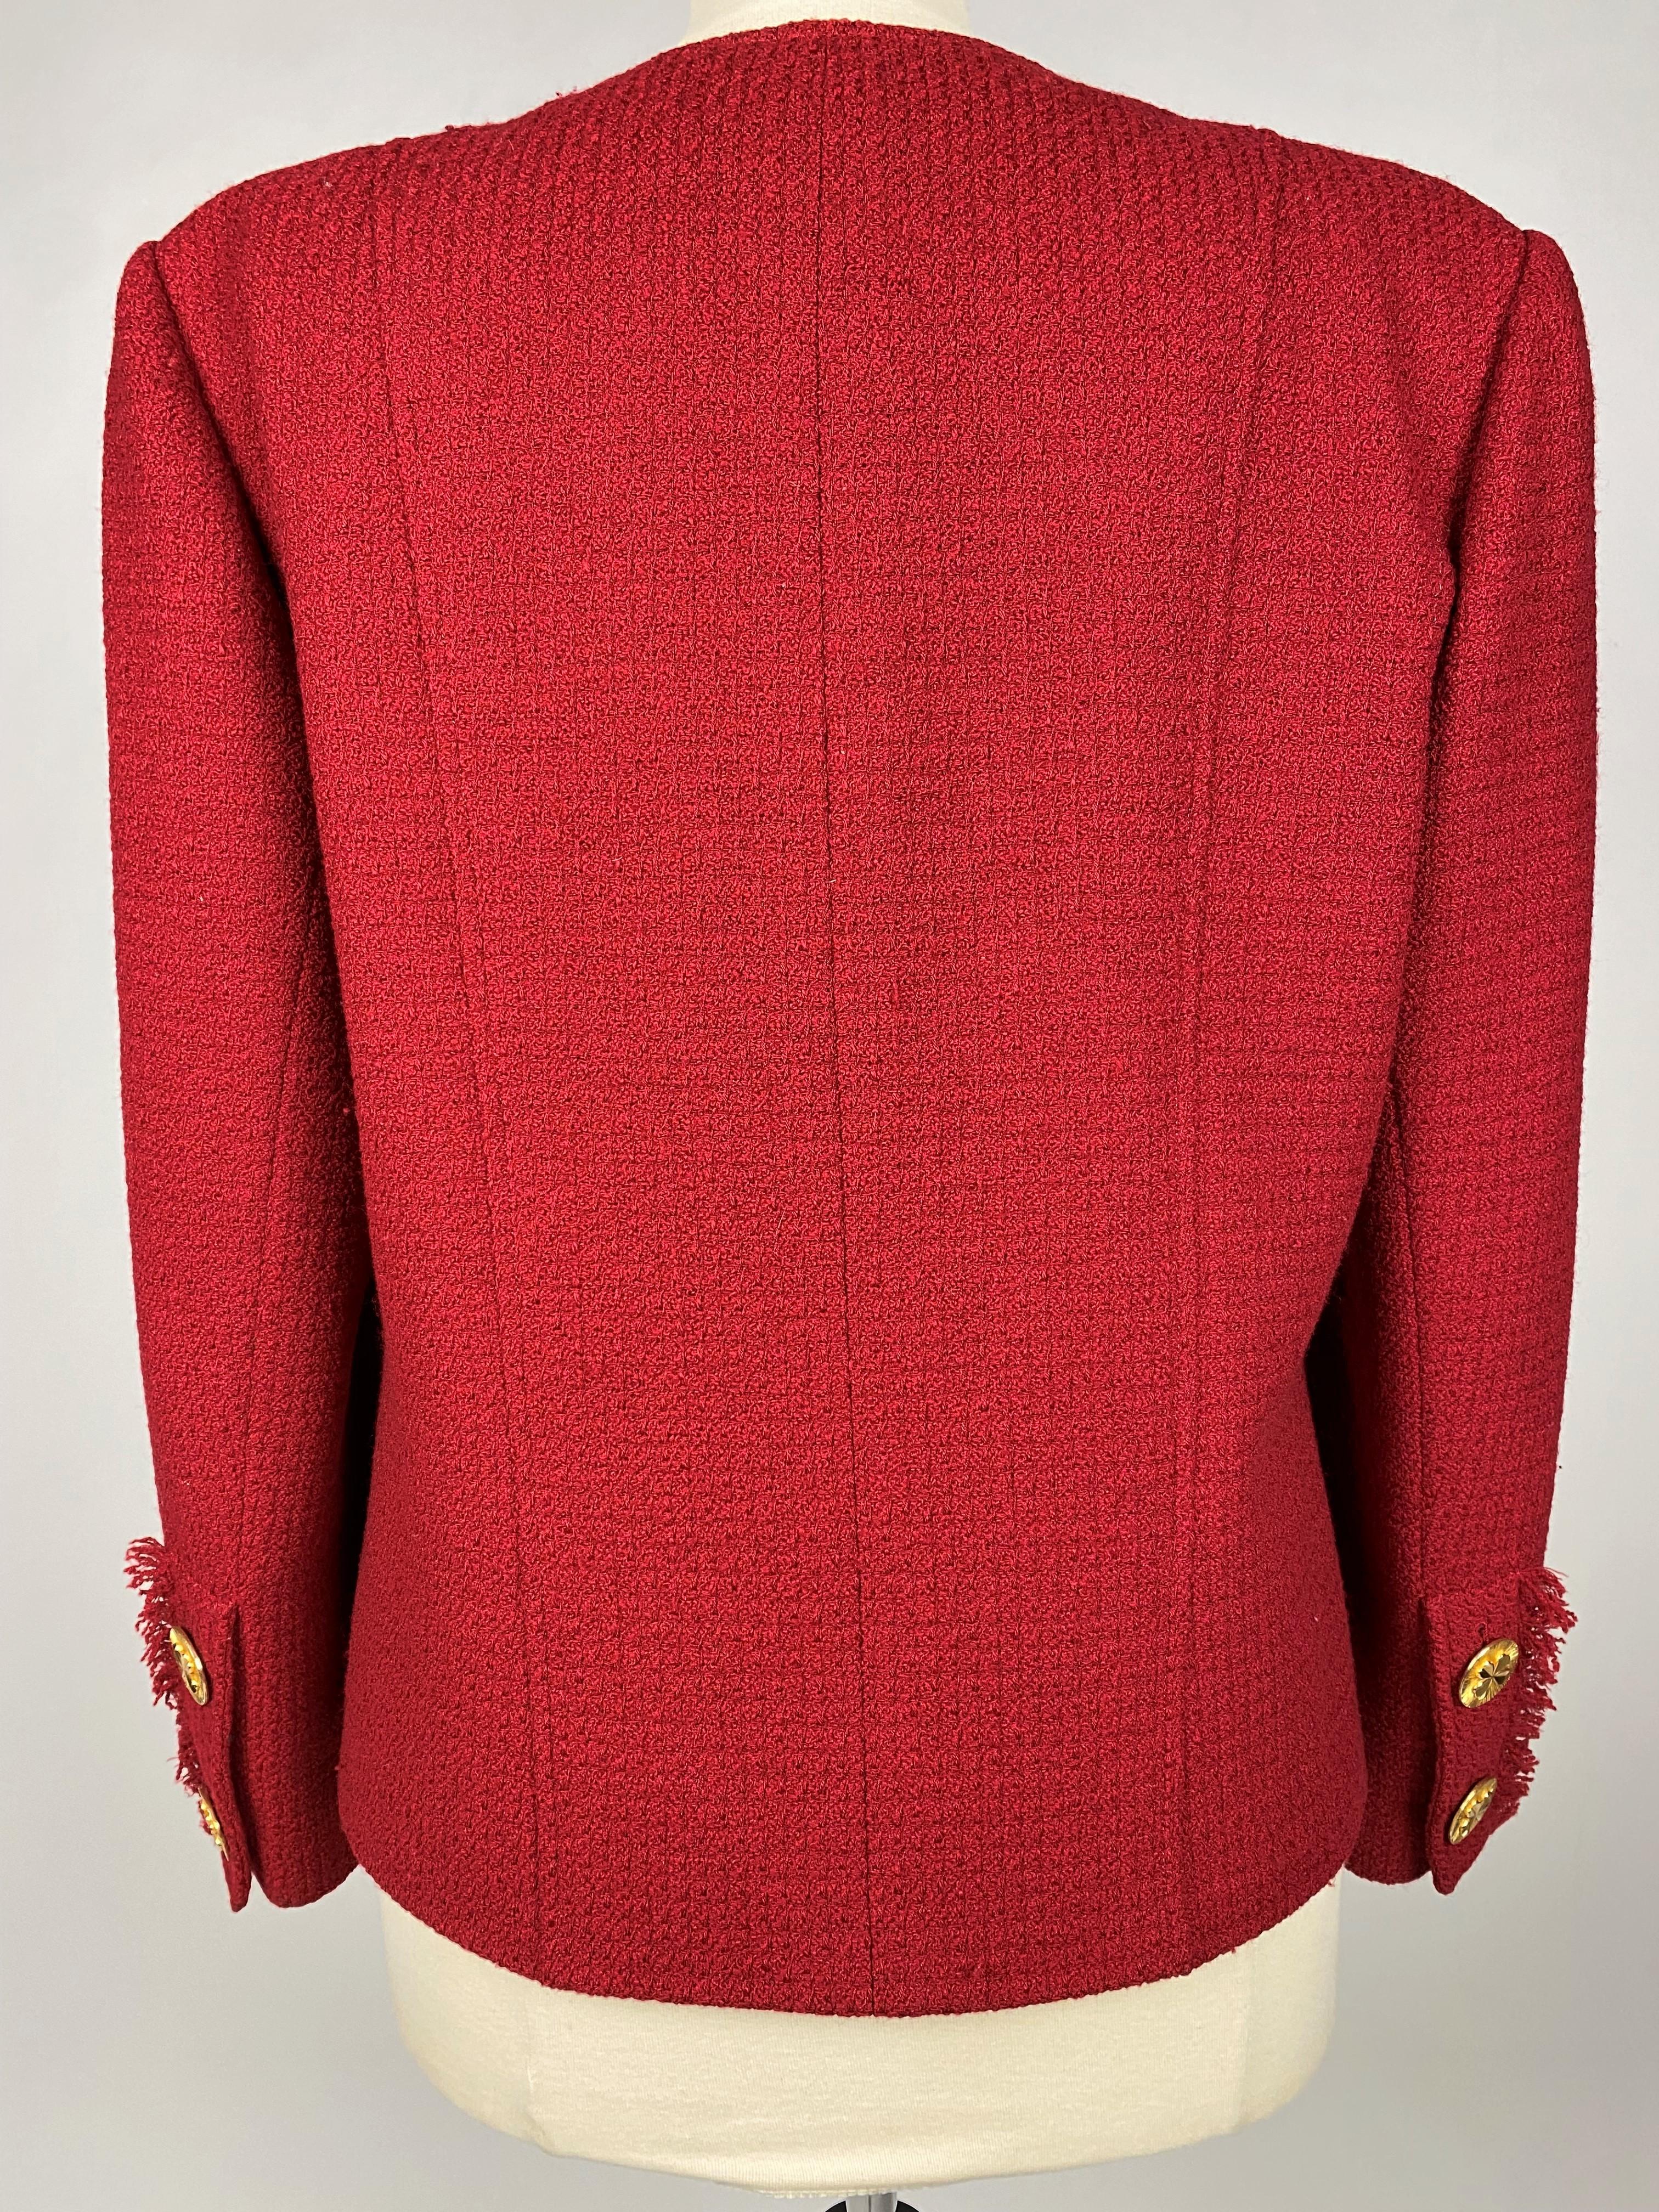 A Chanel - Karl Lagerfeld Red Mohair Wool Jacket Circa 1995-2000 For Sale 1